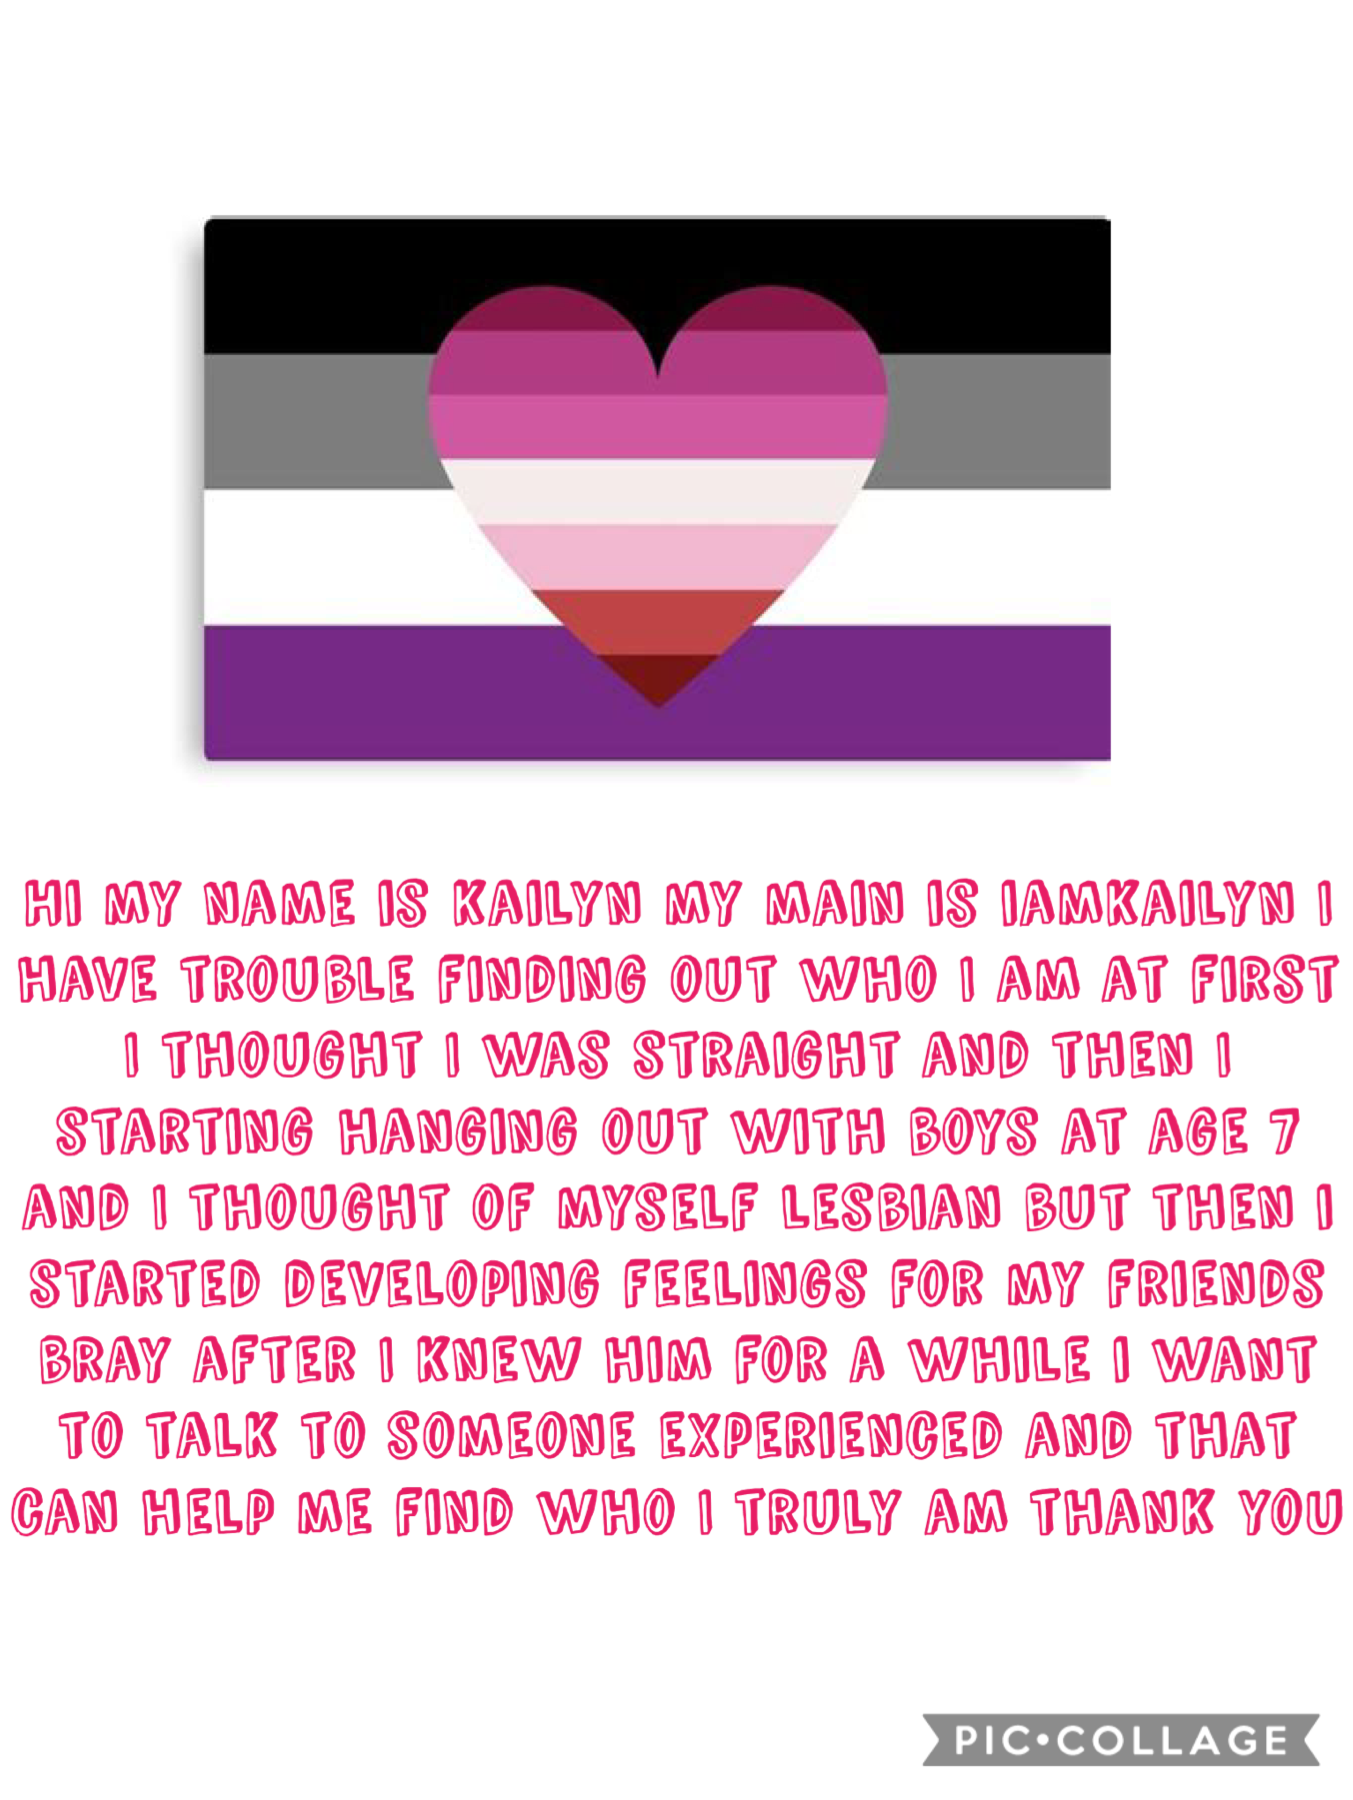 Collage by LGBTQSupportGroup